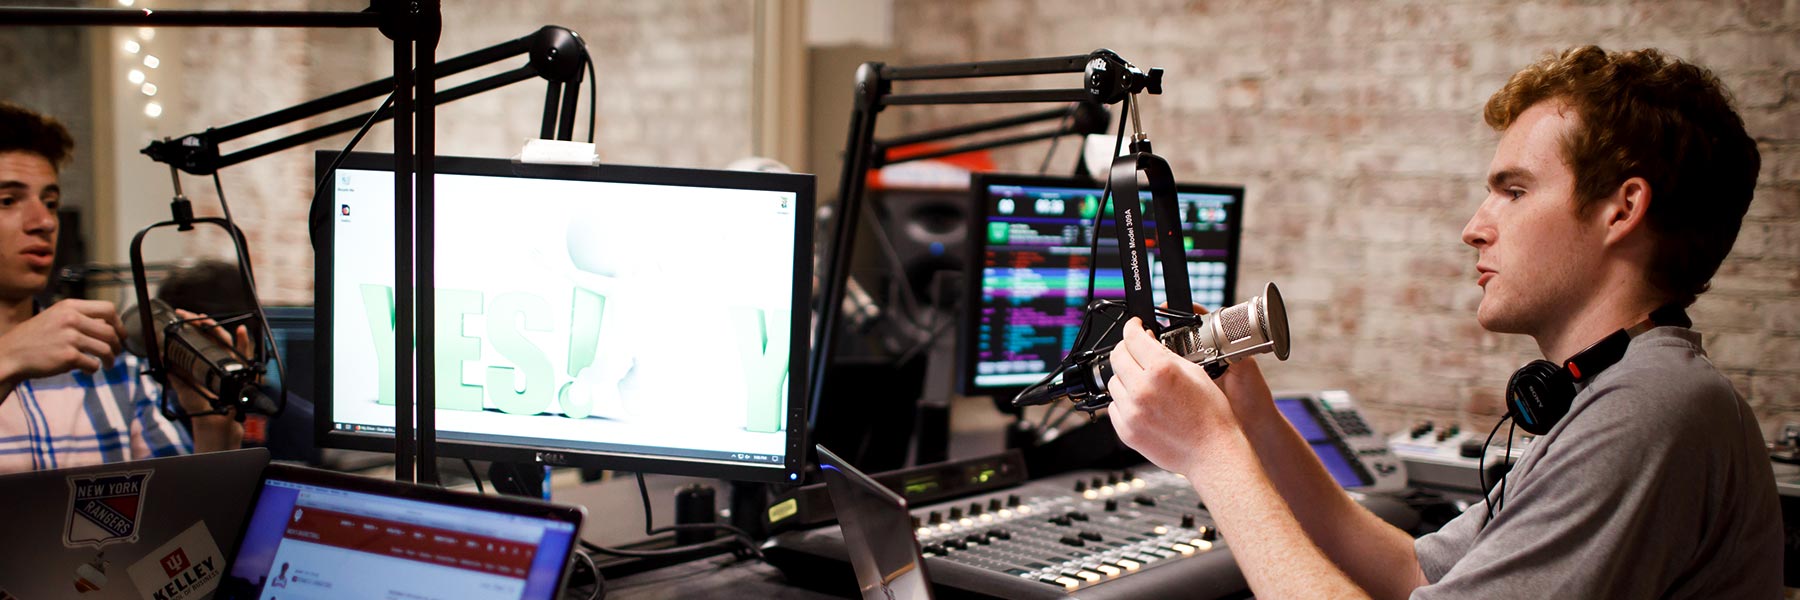 Two students operate the equipment in a radio studio.